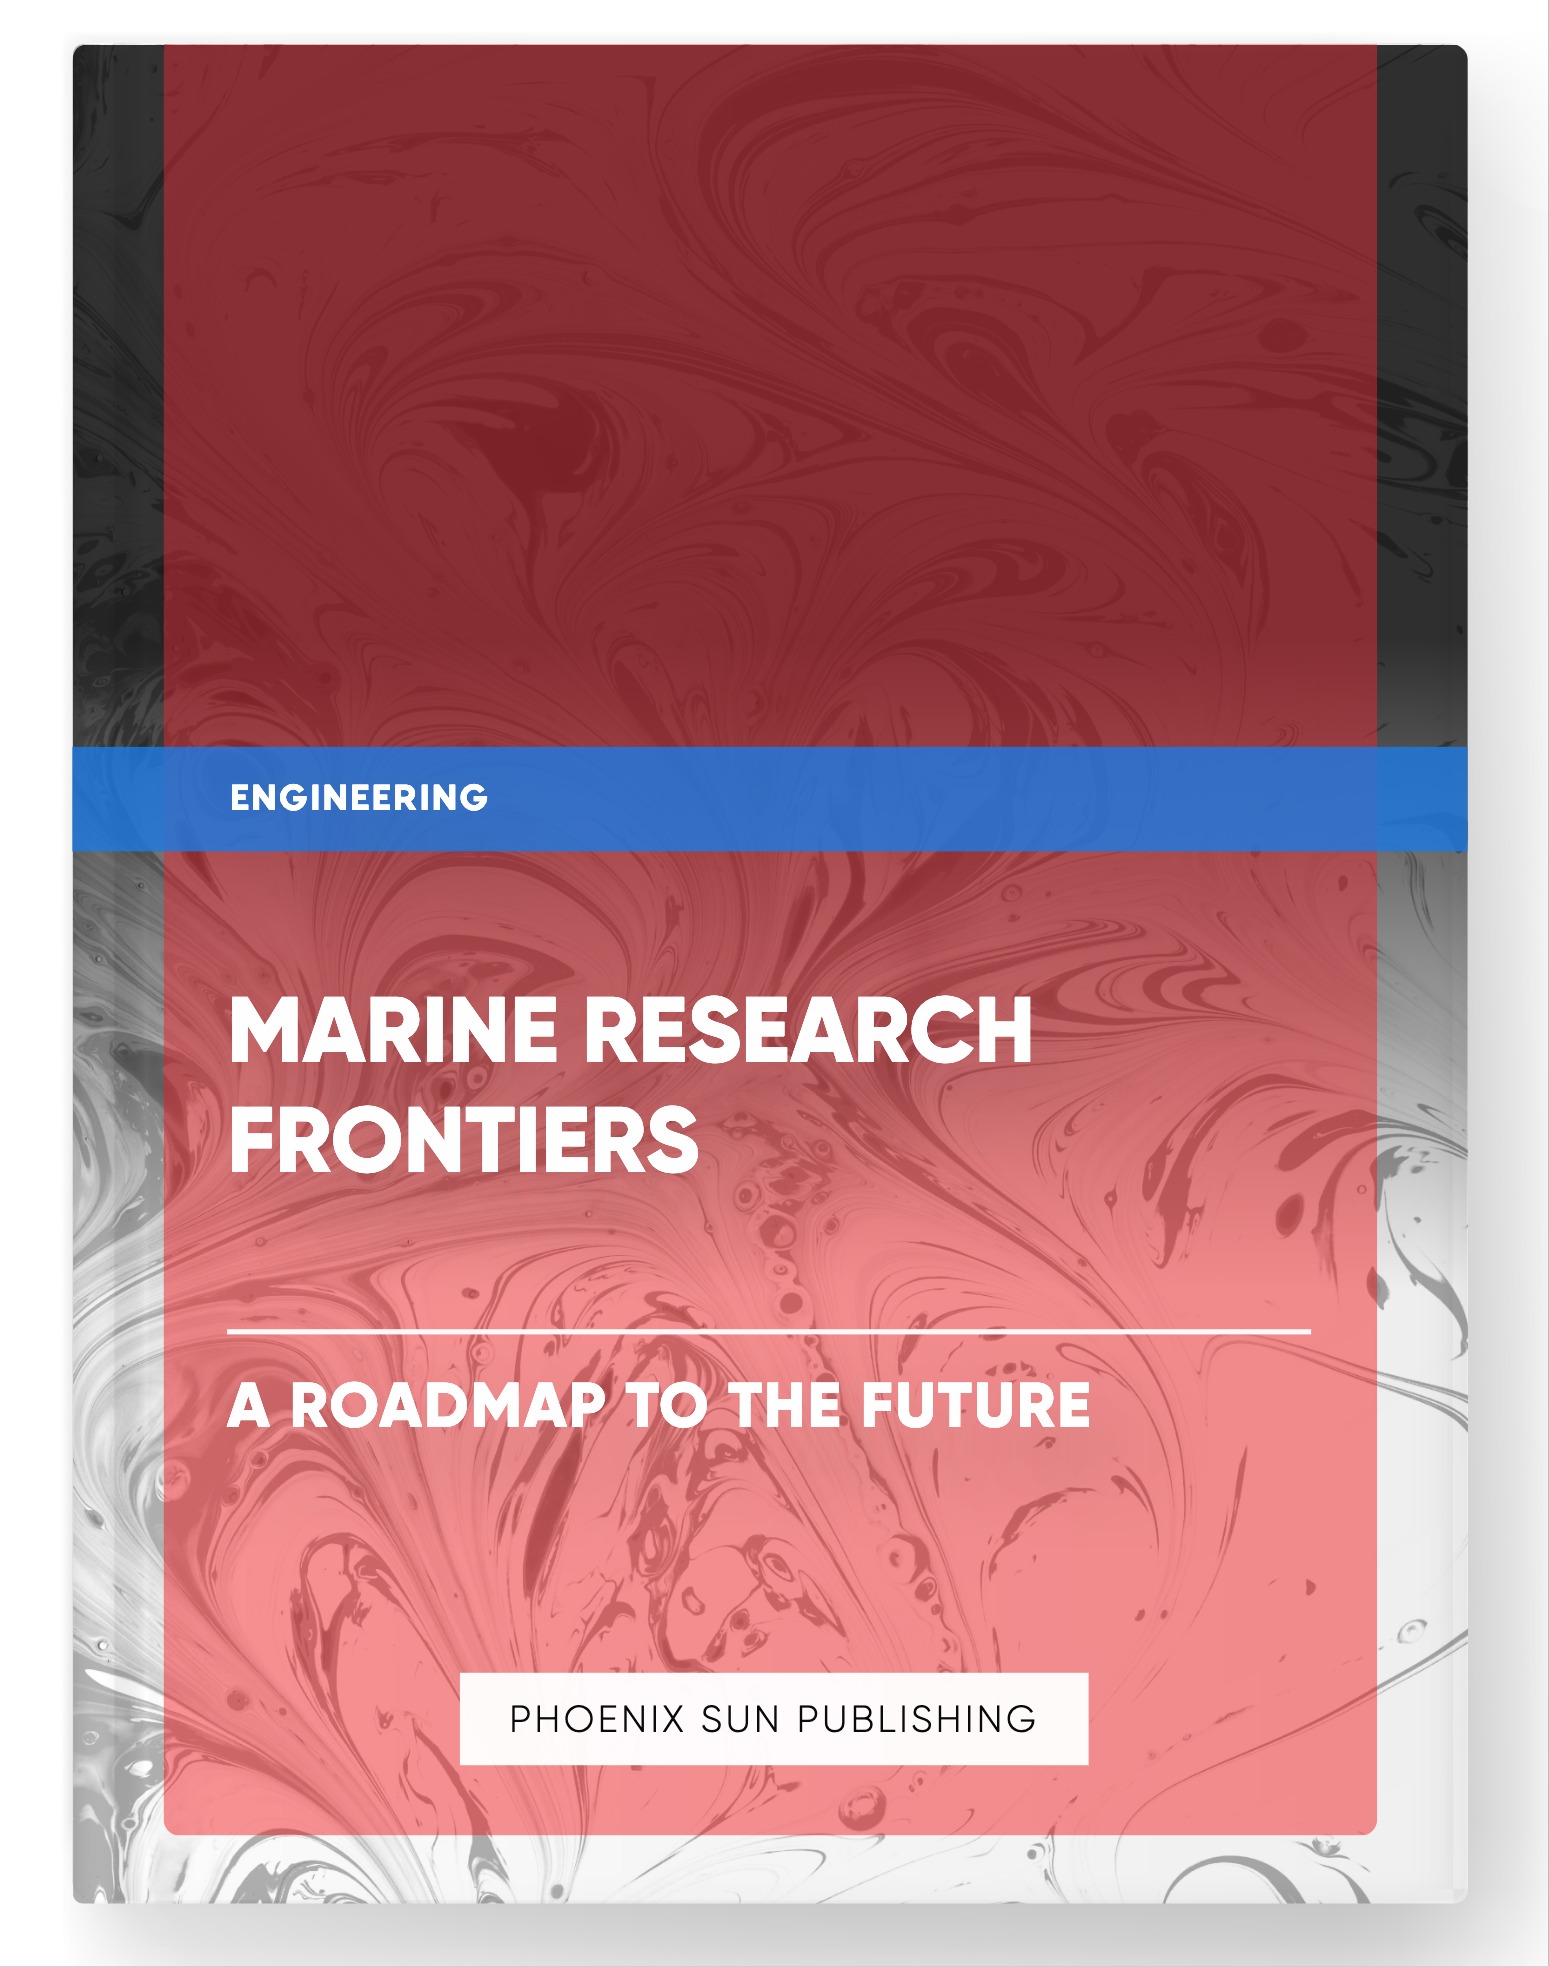 Marine Research Frontiers – A Roadmap to the Future